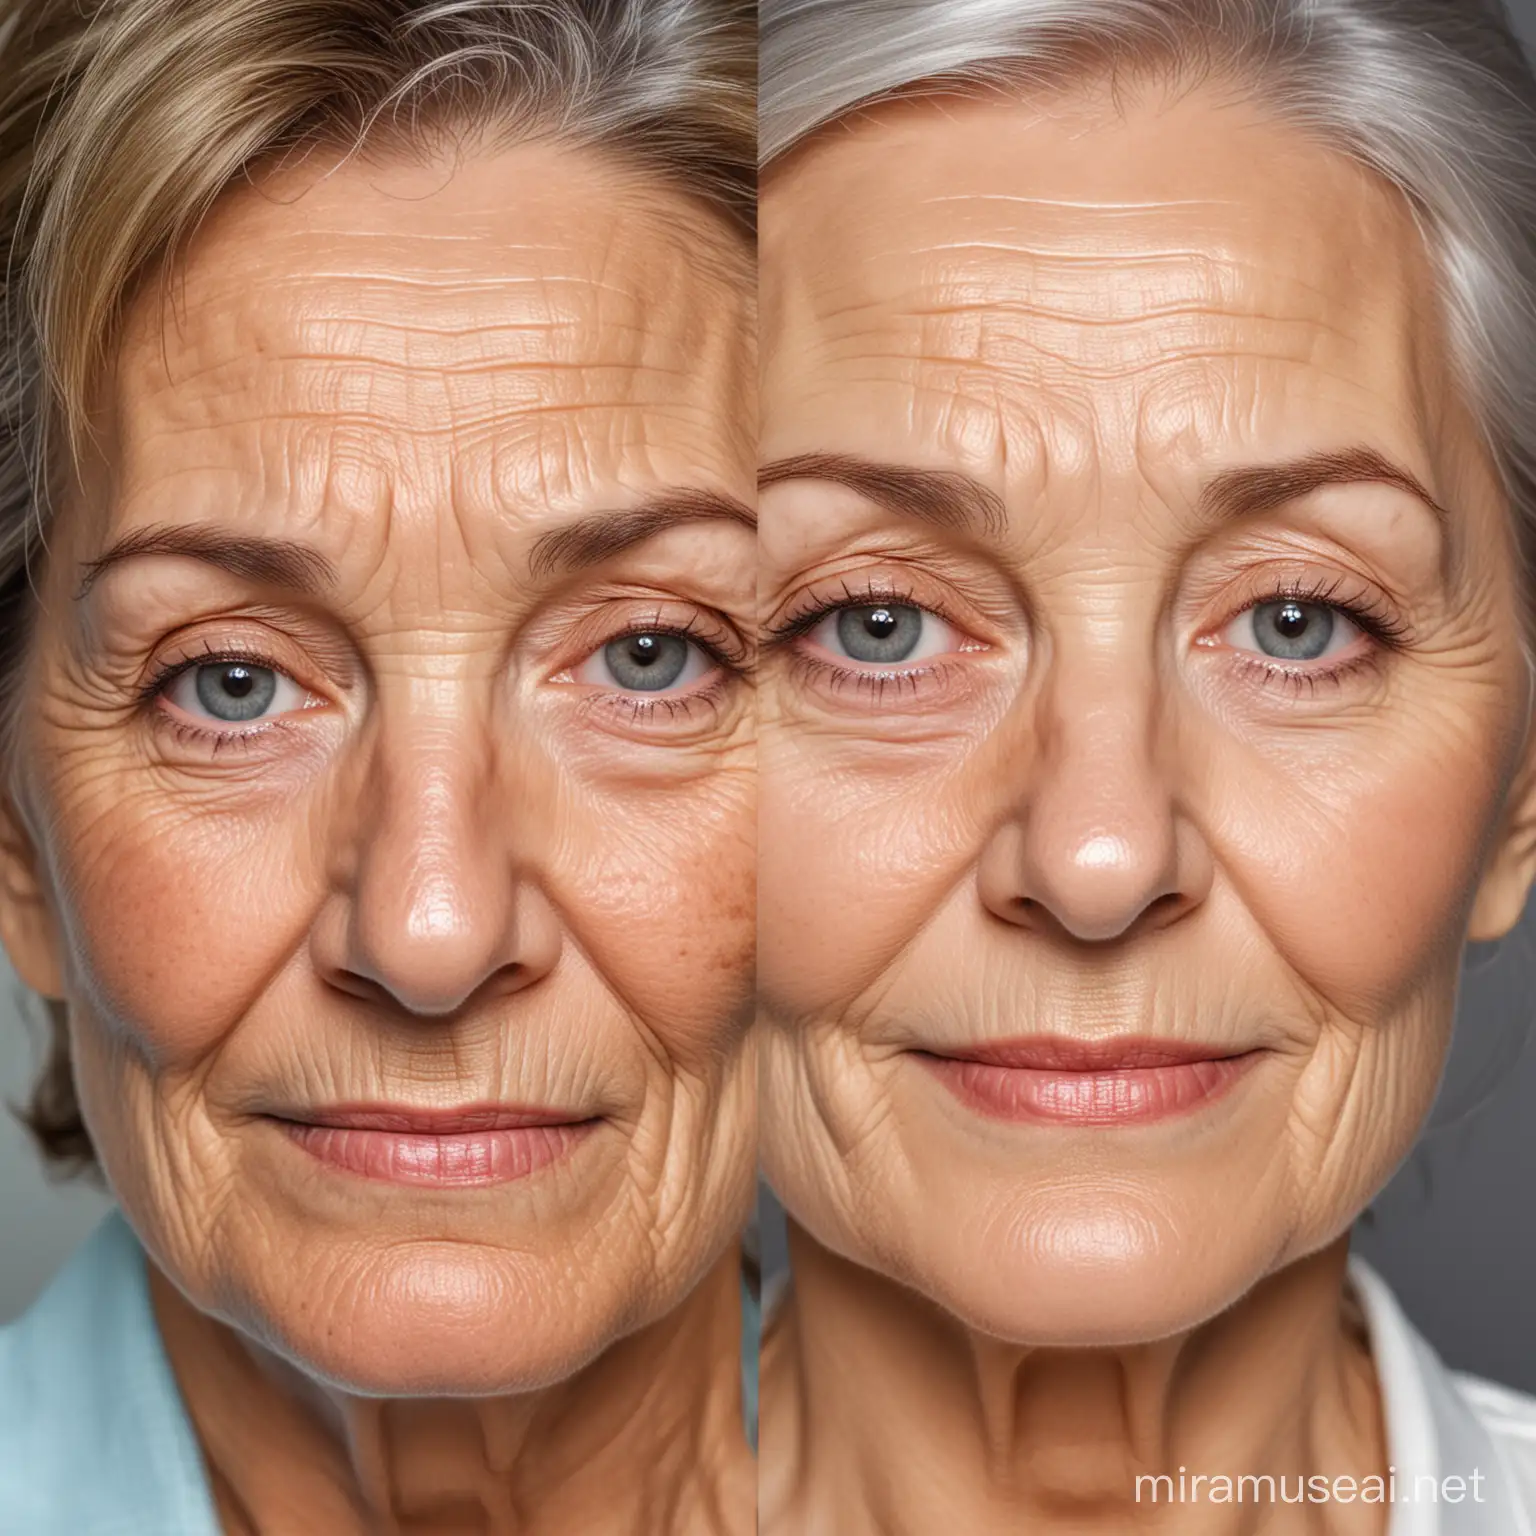 Portrait of Two Women A Comparison of Aging Gracefully